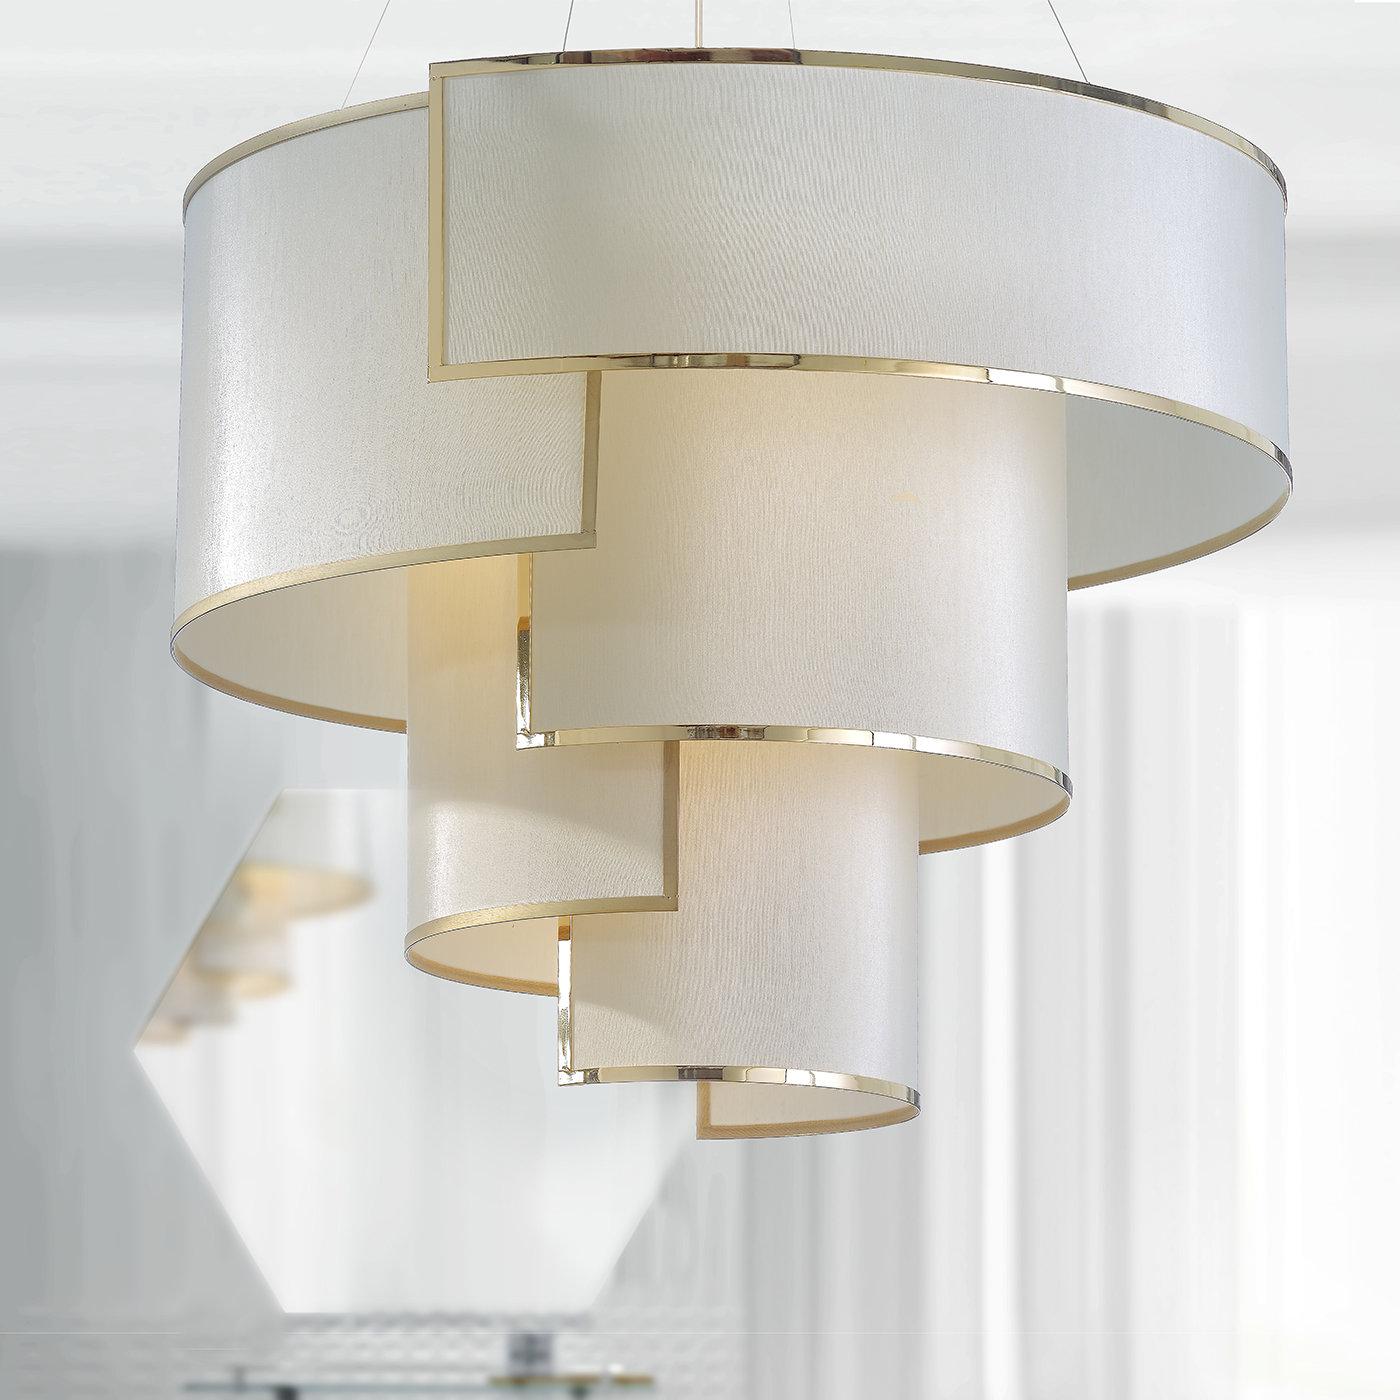 An awe-inspiring design of Art Deco inspiration is the defining feature of this stunning chandelier that is sure to decorate any room with glamorous style. The tiered silhouette is composed of five semicircular elements of ivory fabric with PVC